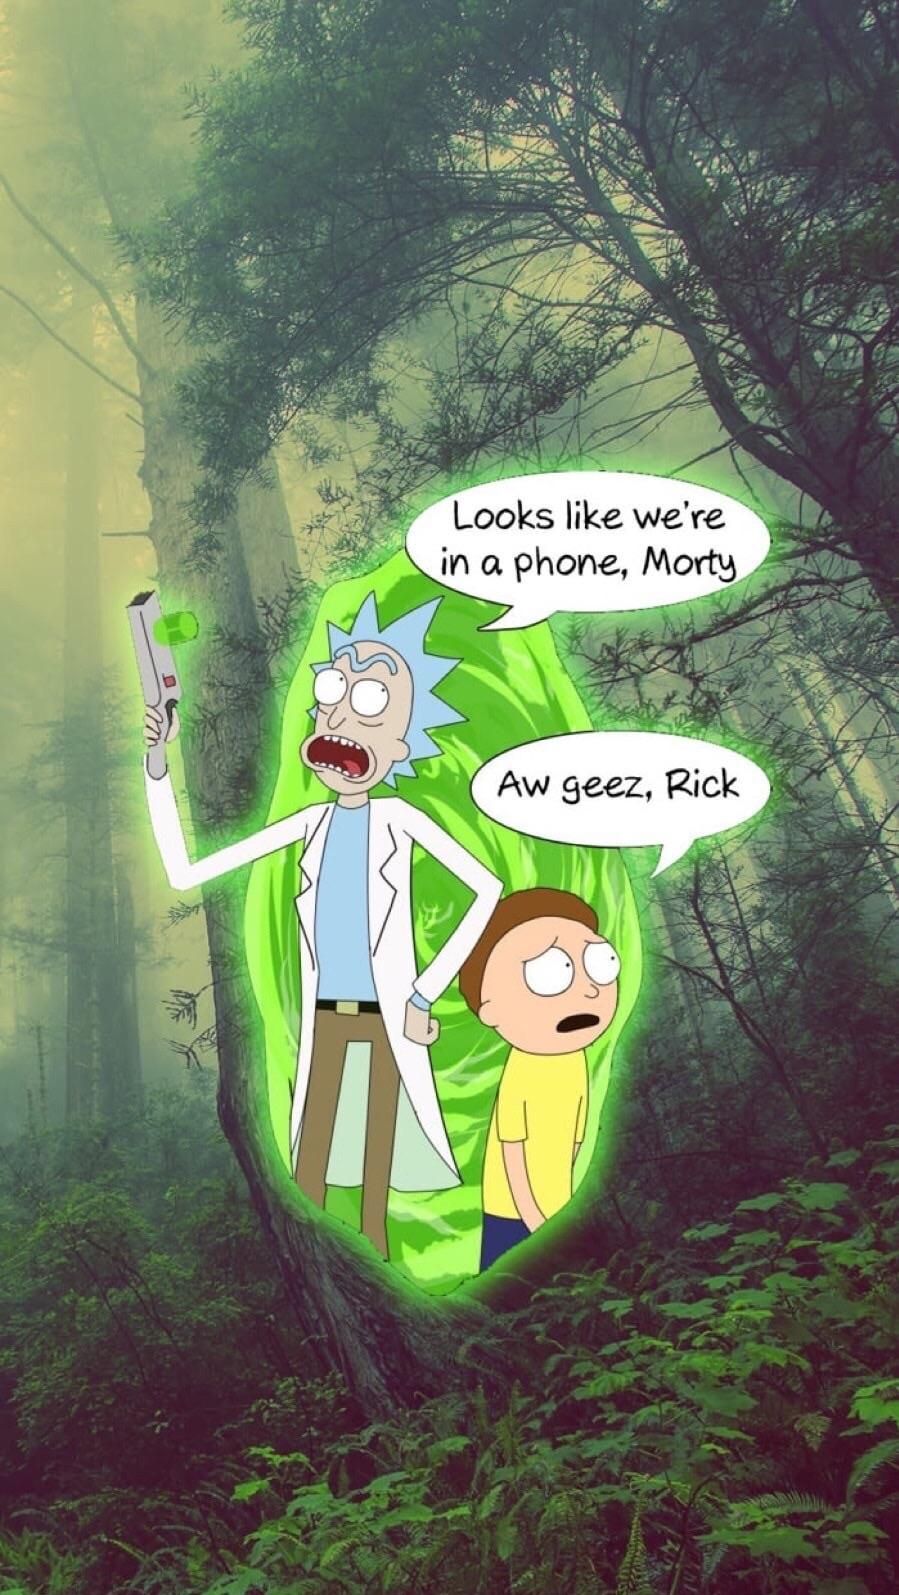 rick and morty phone - Looks we're in a phone, Morty Aw geez, Rick